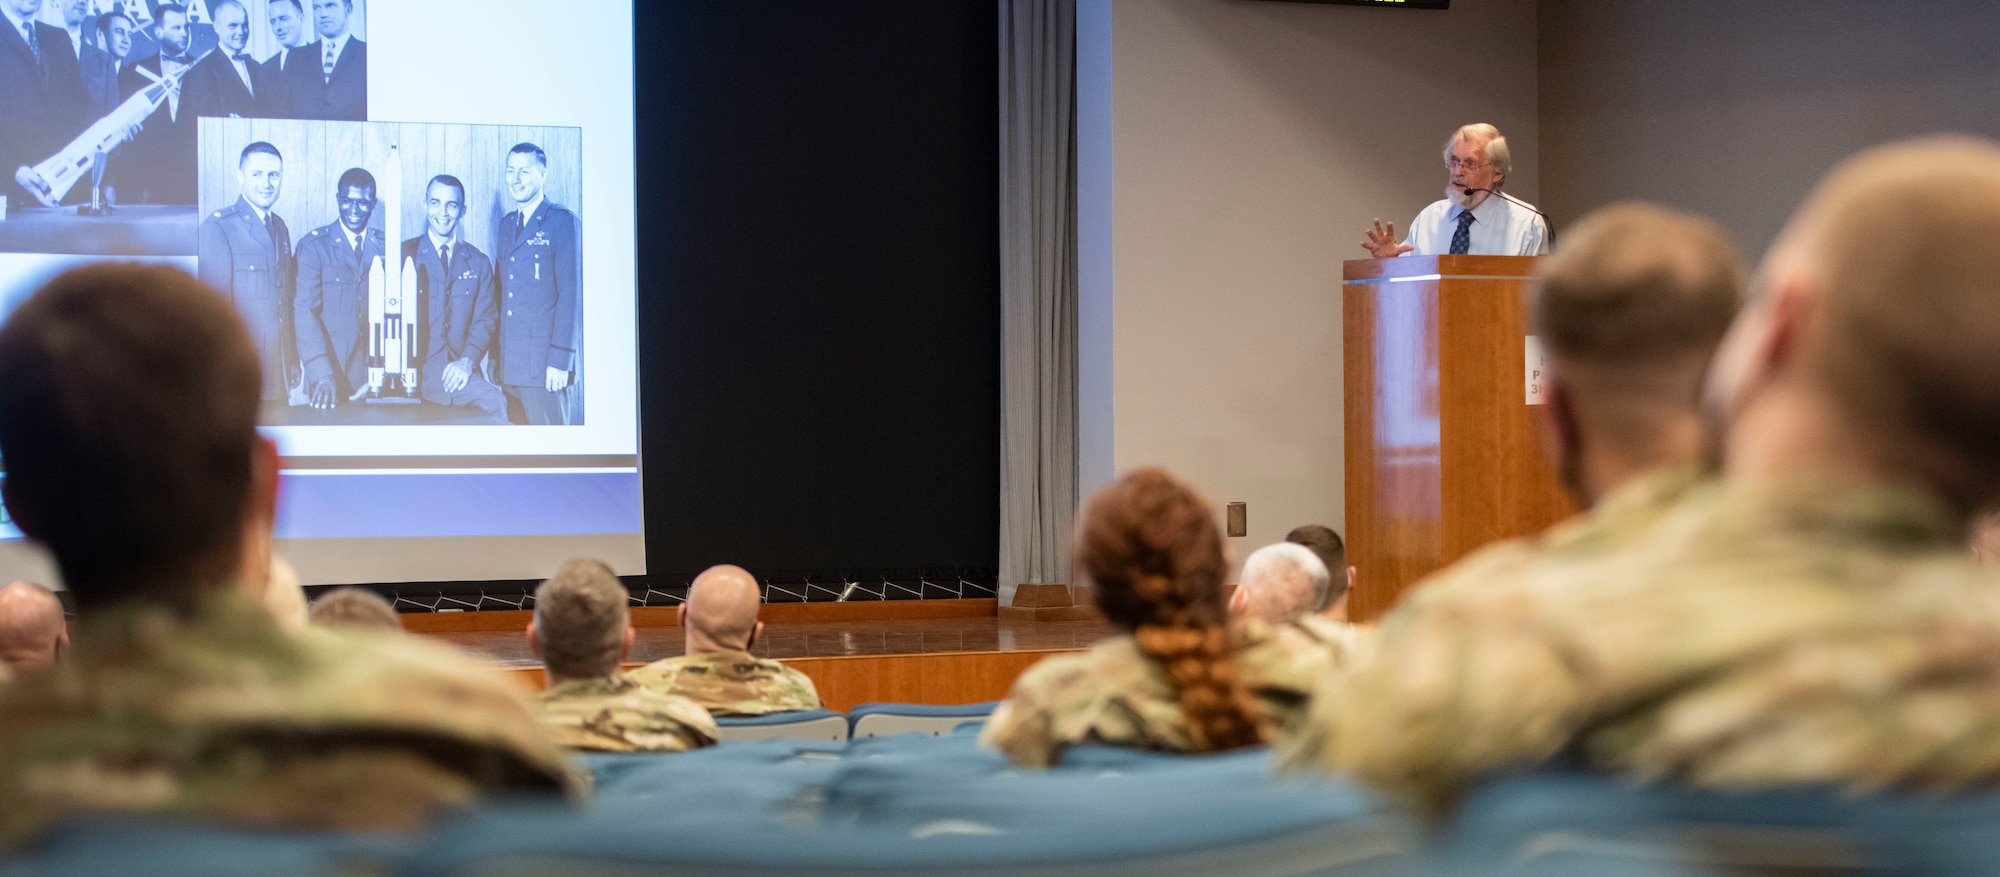 Dr. Rick Sturdevant, Space Training and Readiness Command Historian, delivers a lecture on the history of space operations at Peterson Space Force Base, Colorado, Jan. 24, 2022.  Sturdevant entered civilian service with Air Force Space Command, the immediate predecessor of the U.S. Space Force, in the 1980s (U.S. Space Force photo by Dave Grim).